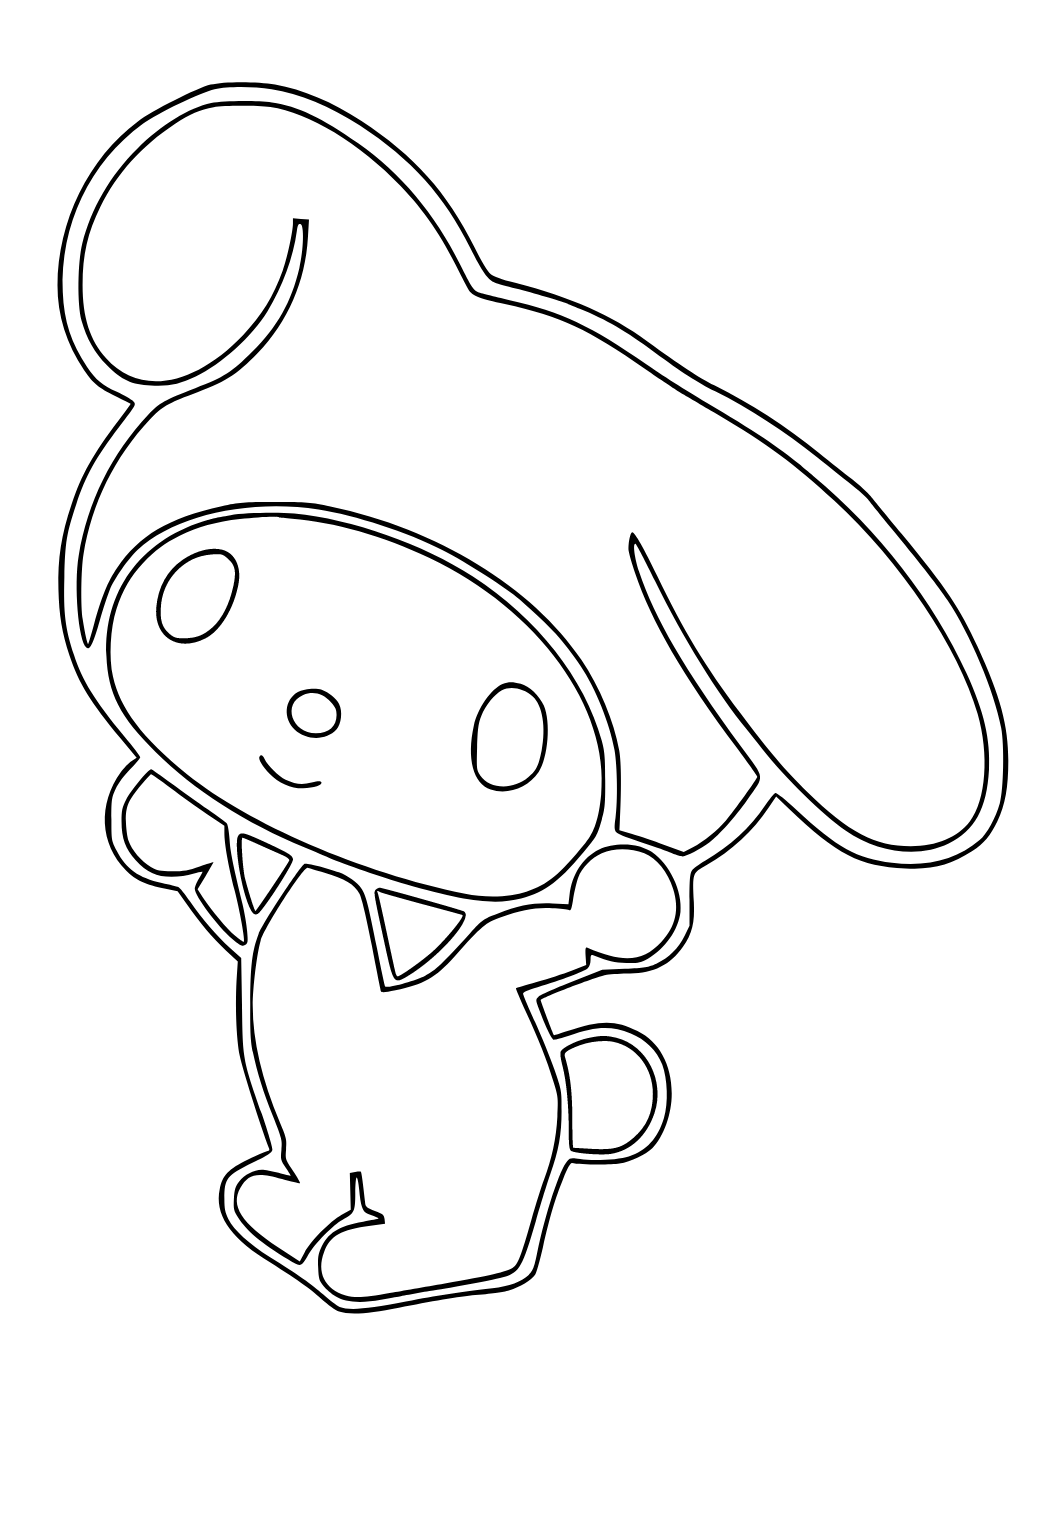 Free printable sanrio rabbit coloring page for adults and kids